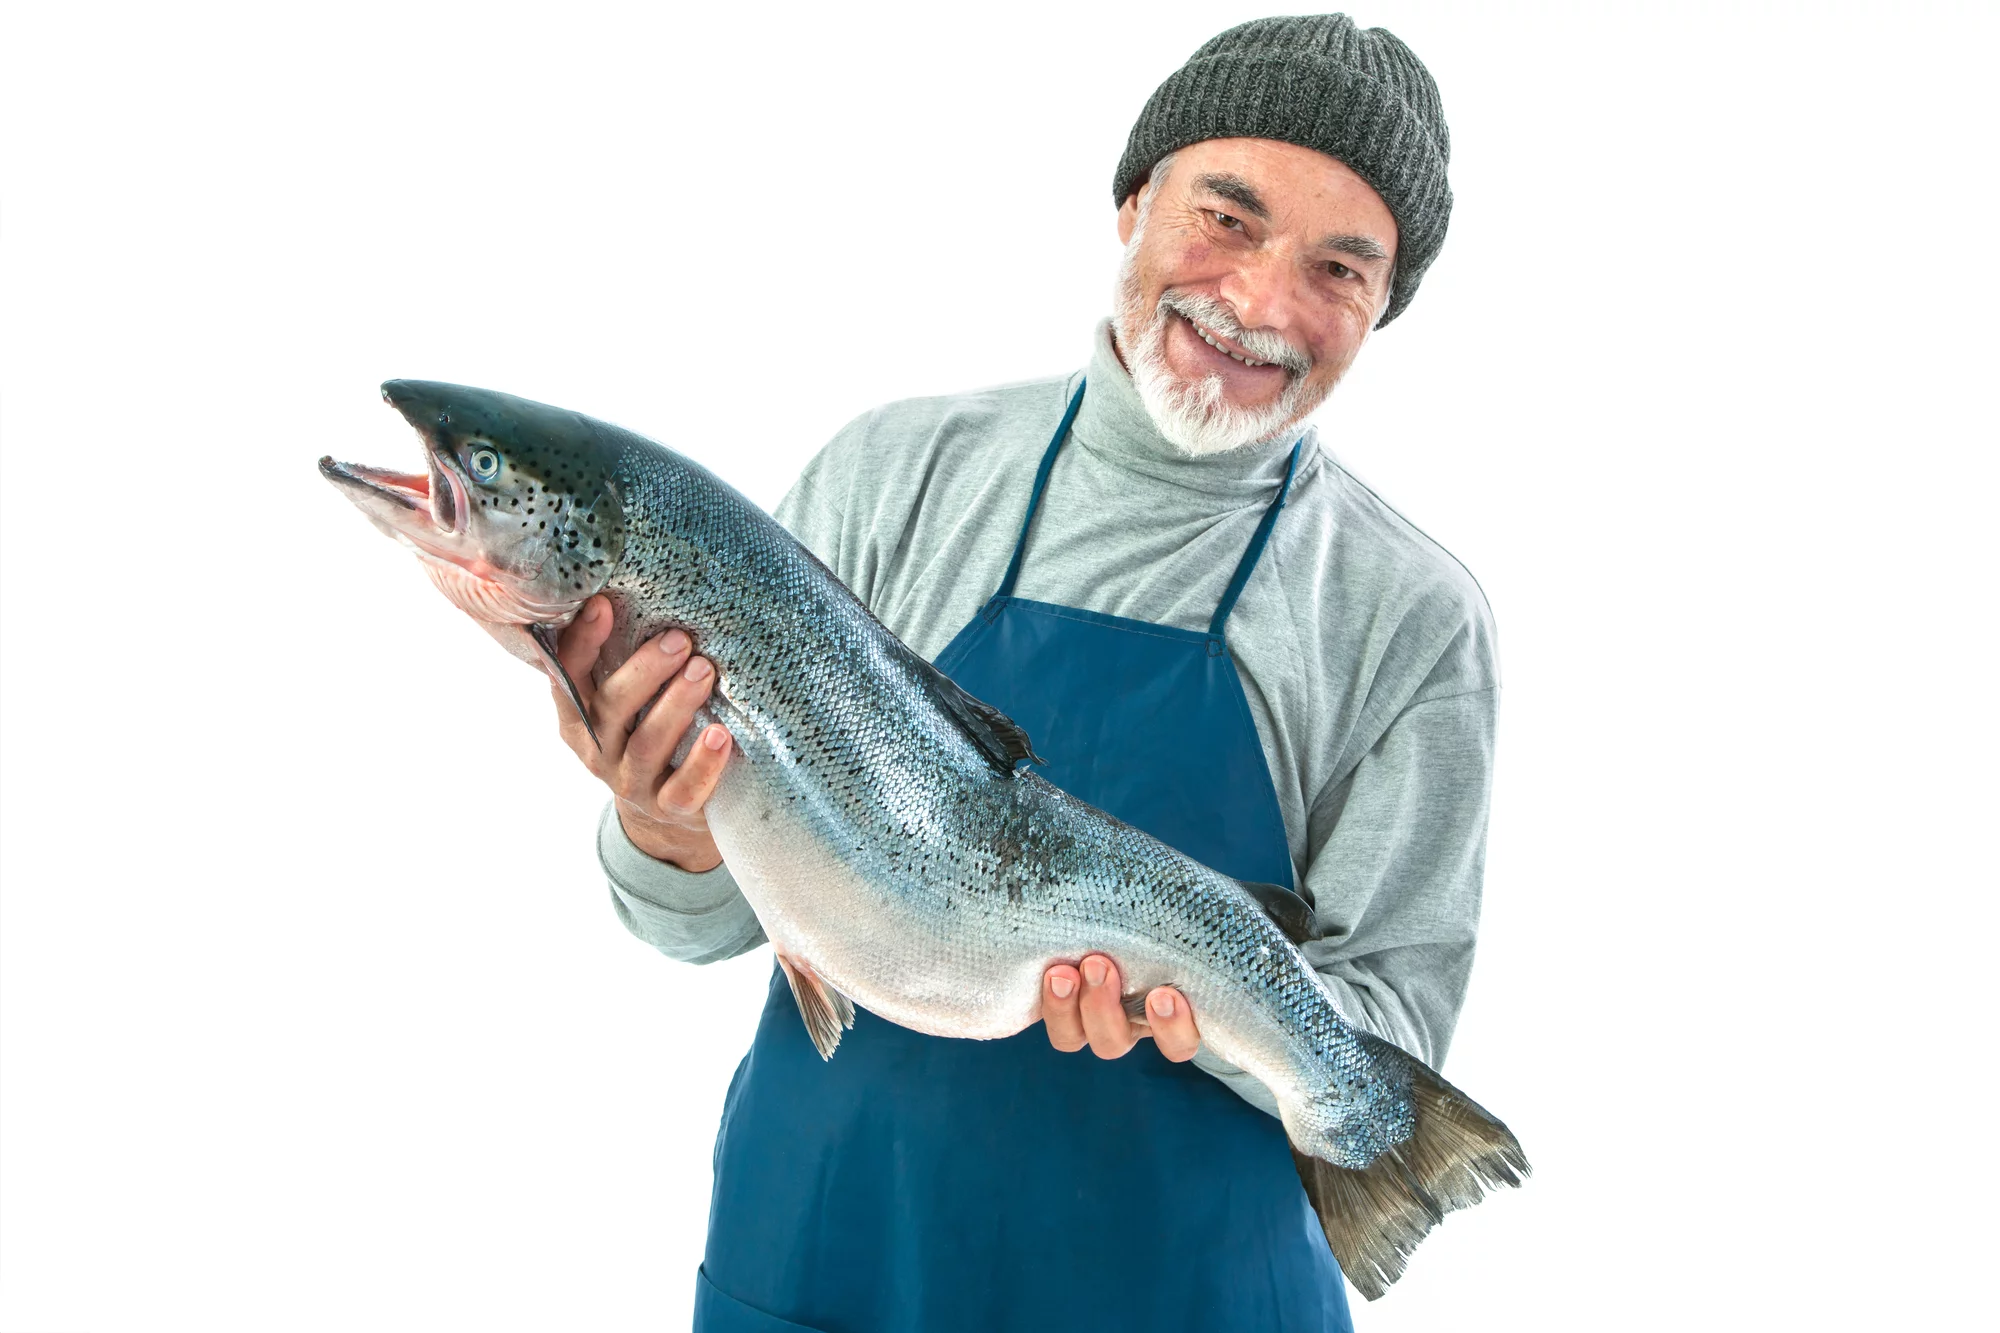 Fisher holding a big atlantic salmon fish isolated on white background